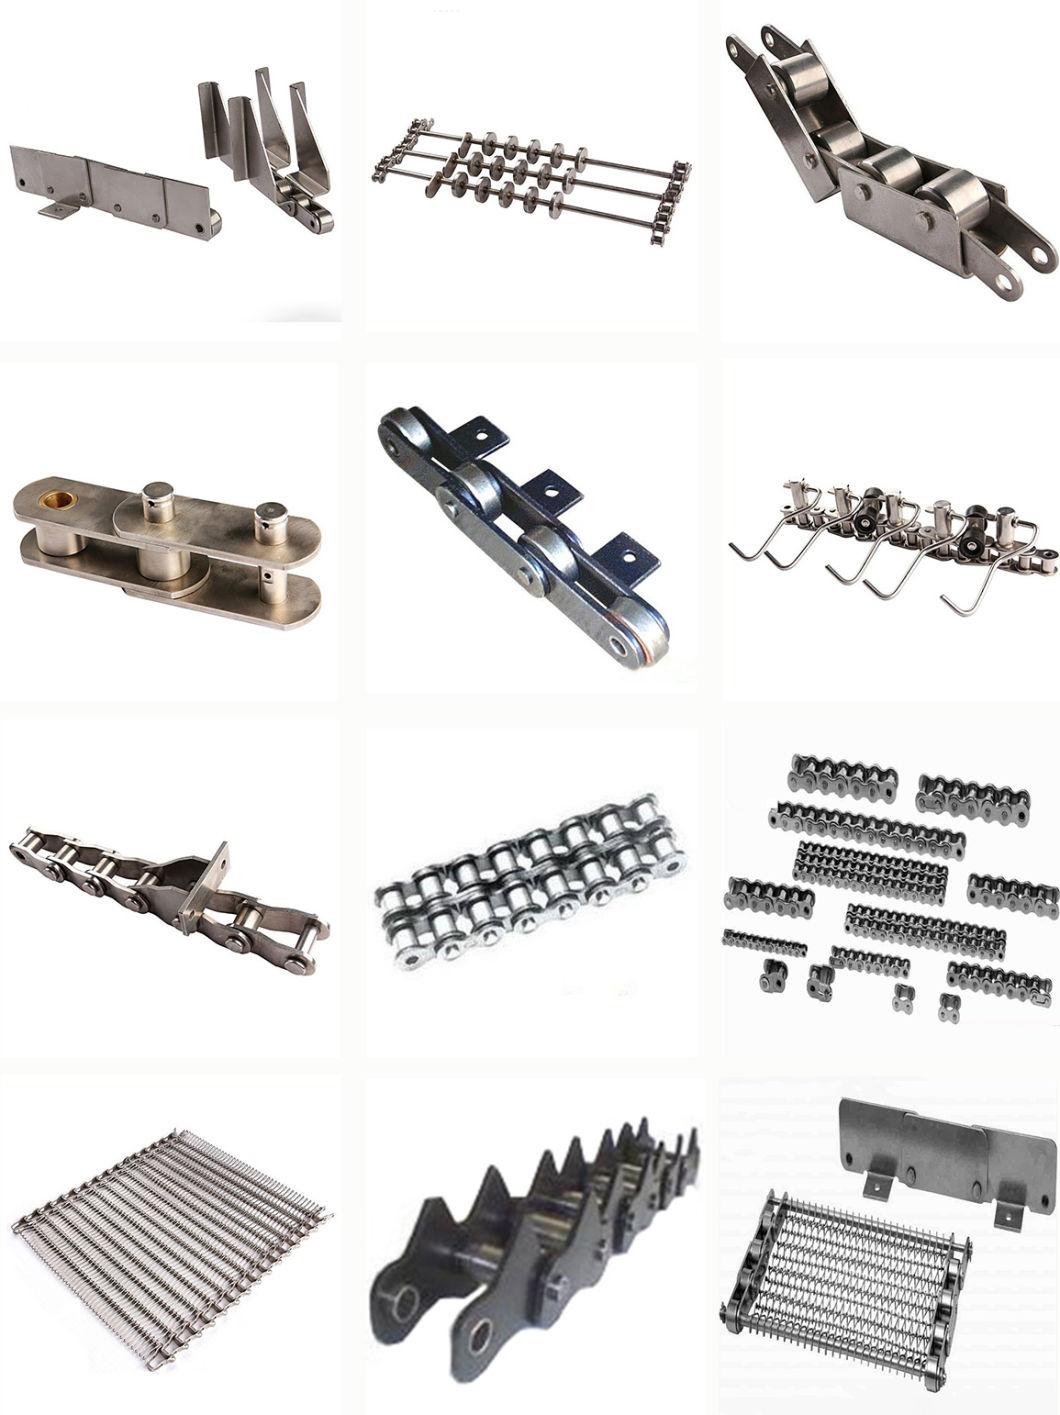 OEM High Precision Agricultural Machinery Engineering Industrial Transmission Conveyor Roller Chain